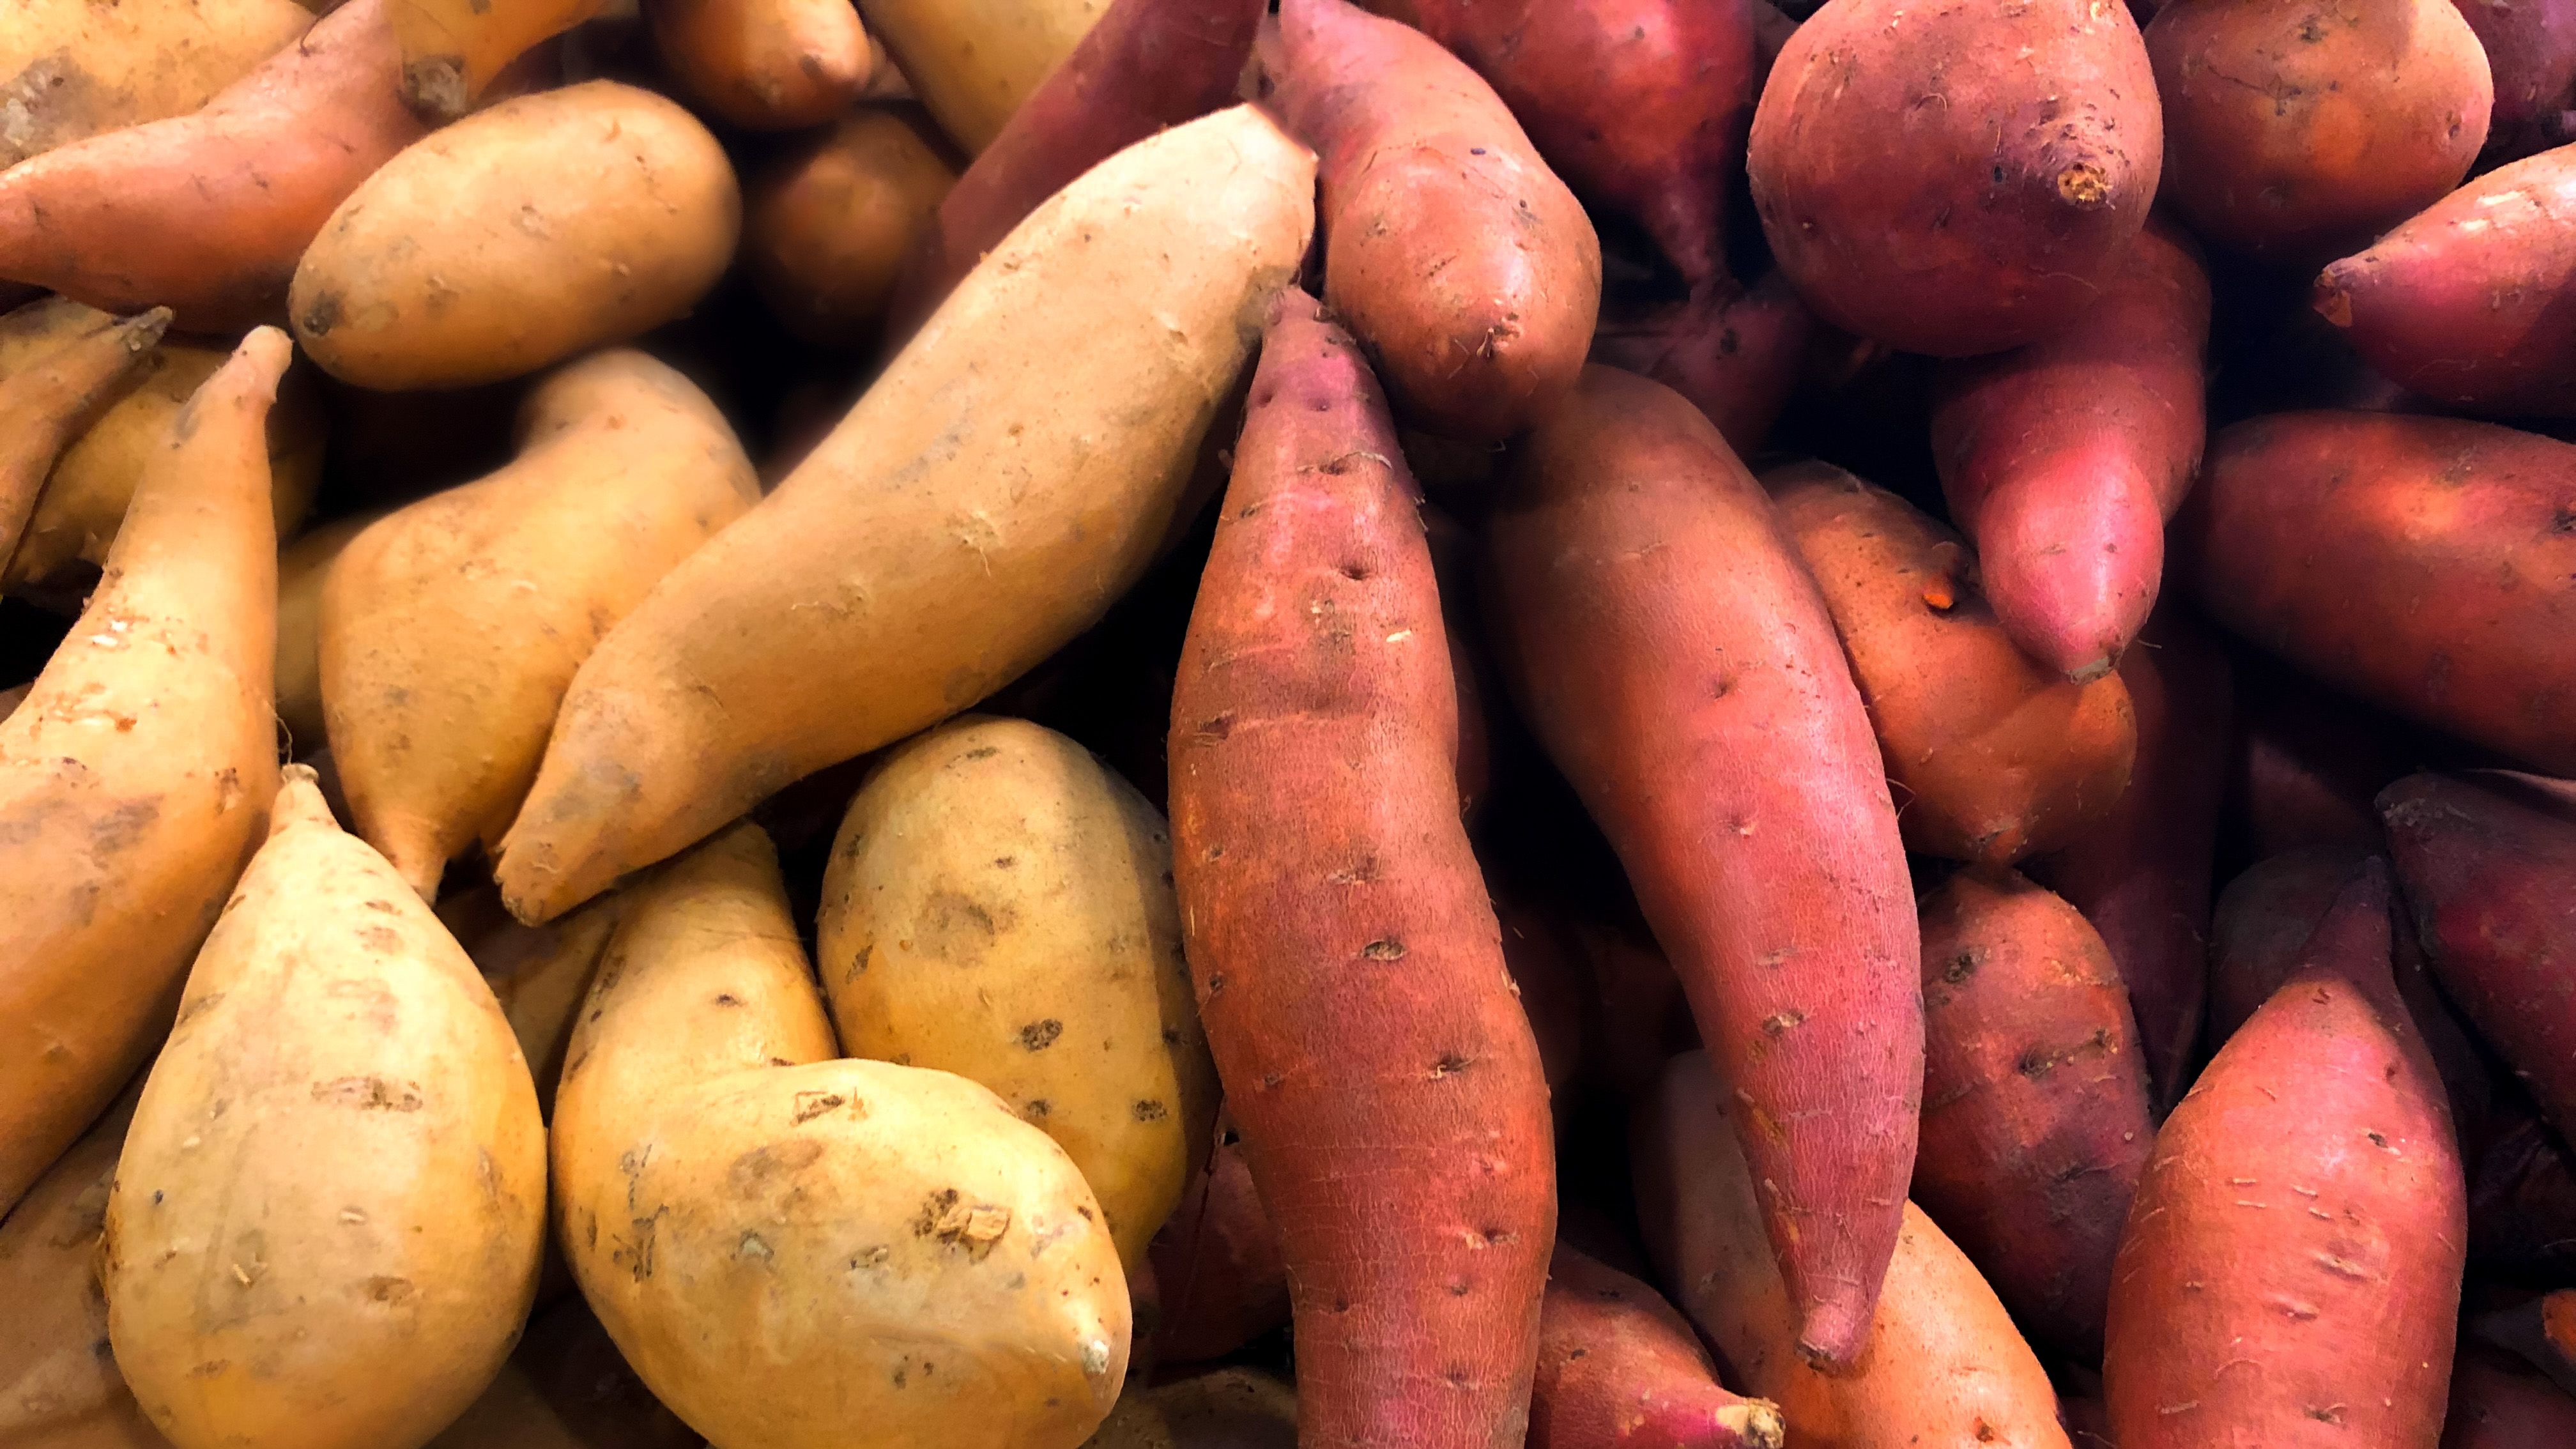 What's The Difference Between Yams And Sweet Potatoes?